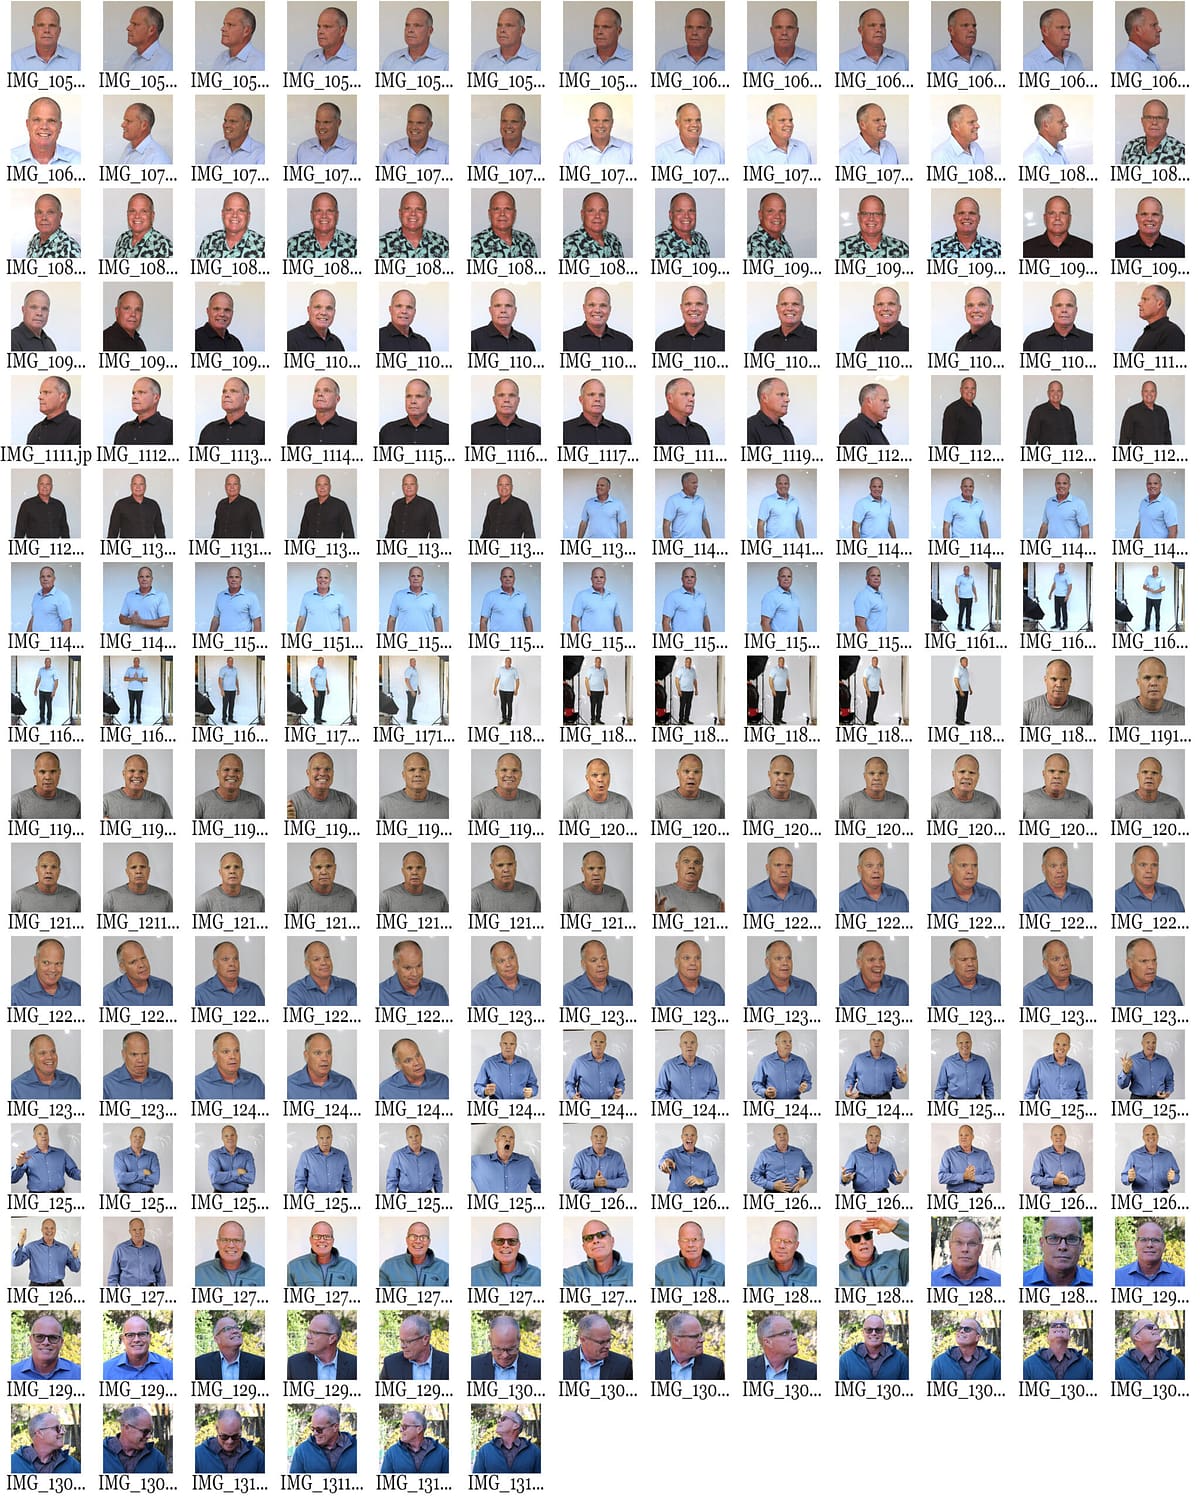 Contact sheet of training images for Stable Diffusion generative AI.